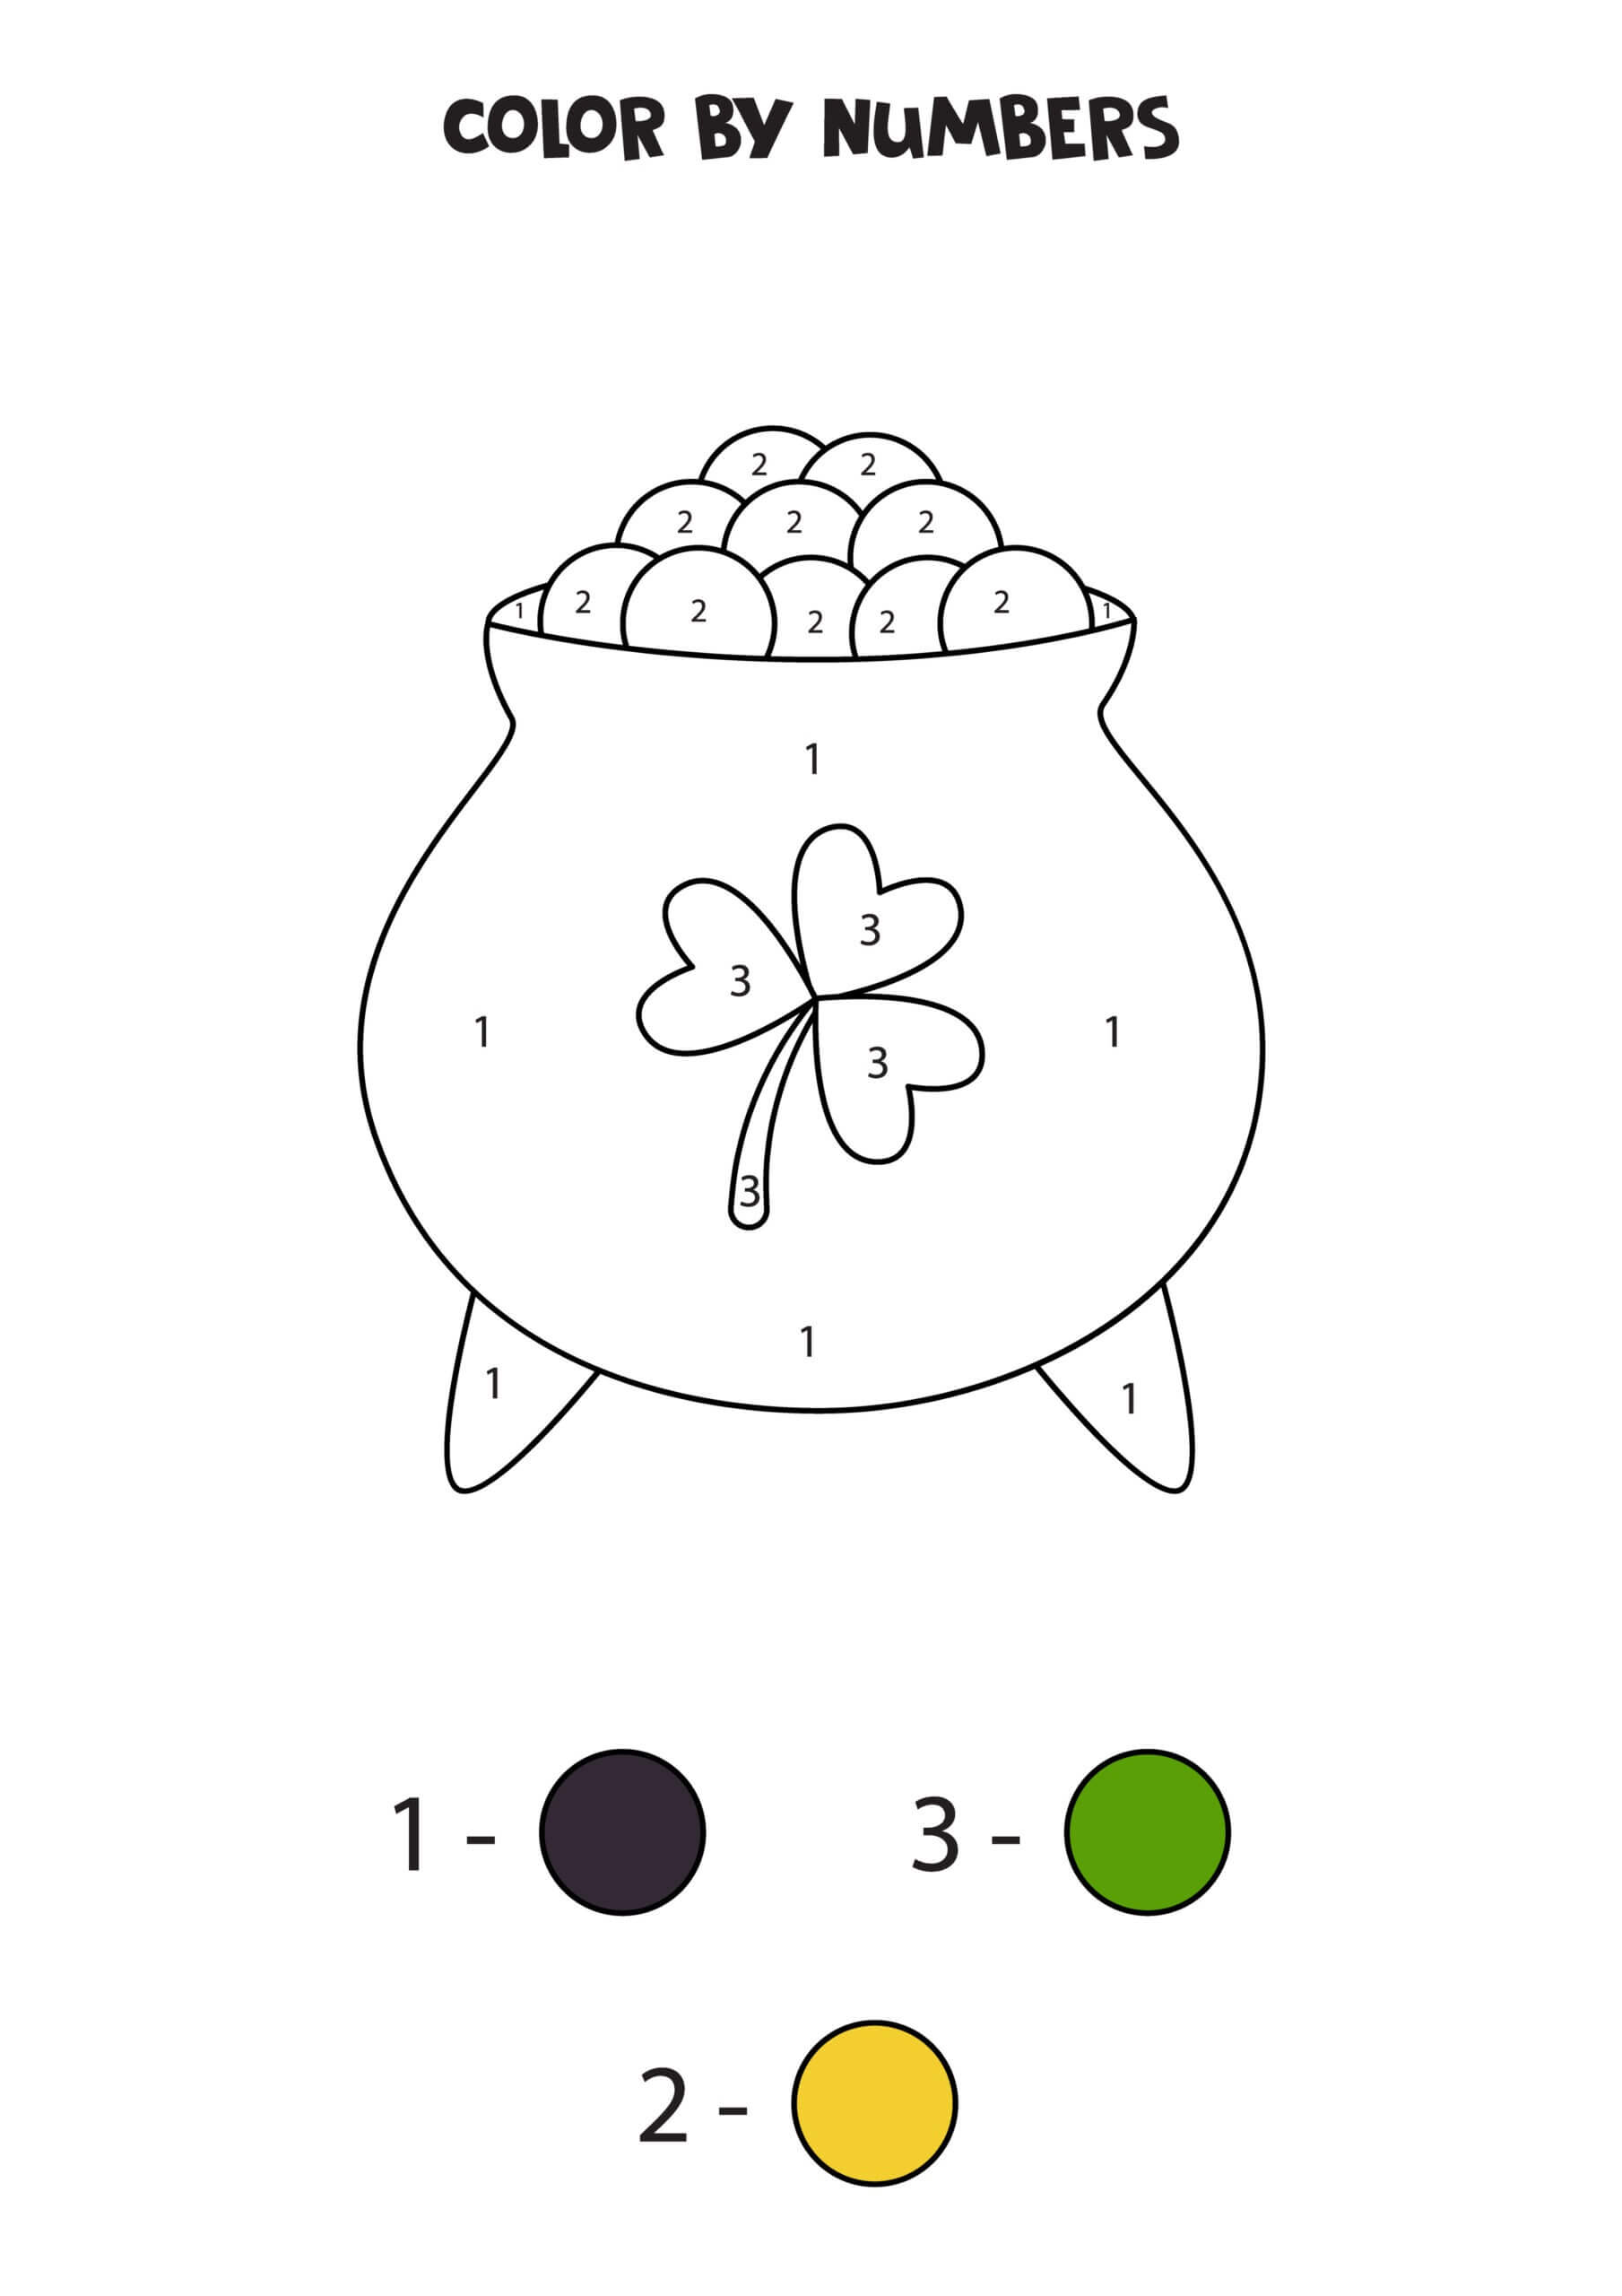 Happy St Patrick's Day Color By Number